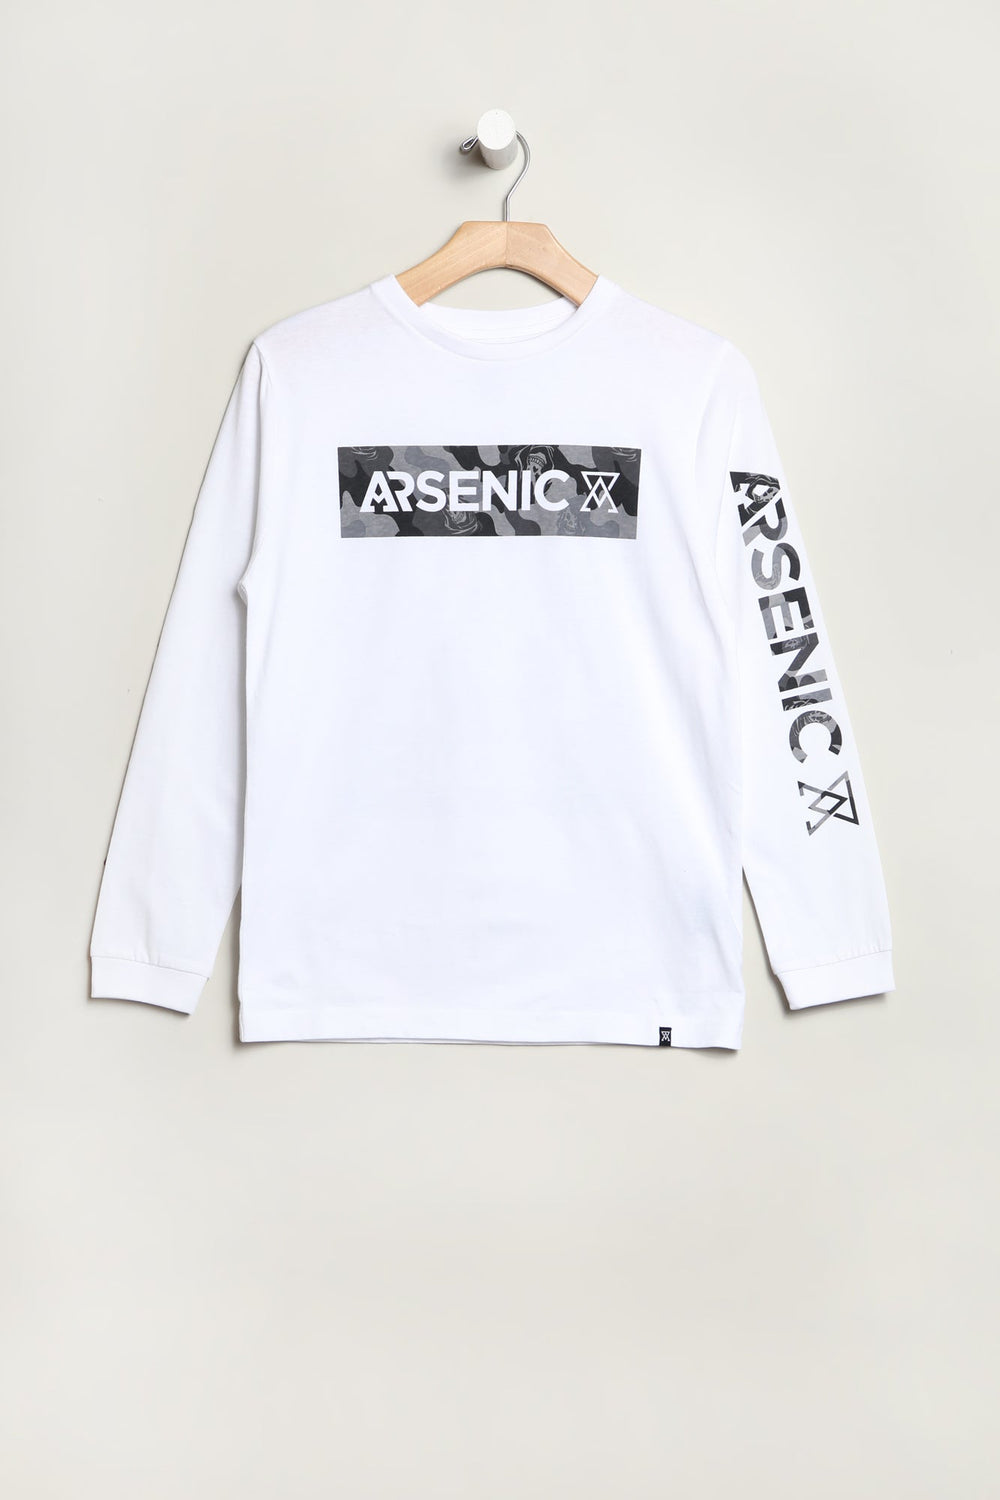 Arsenic Youth Reaper Camo Long Sleeve Top White